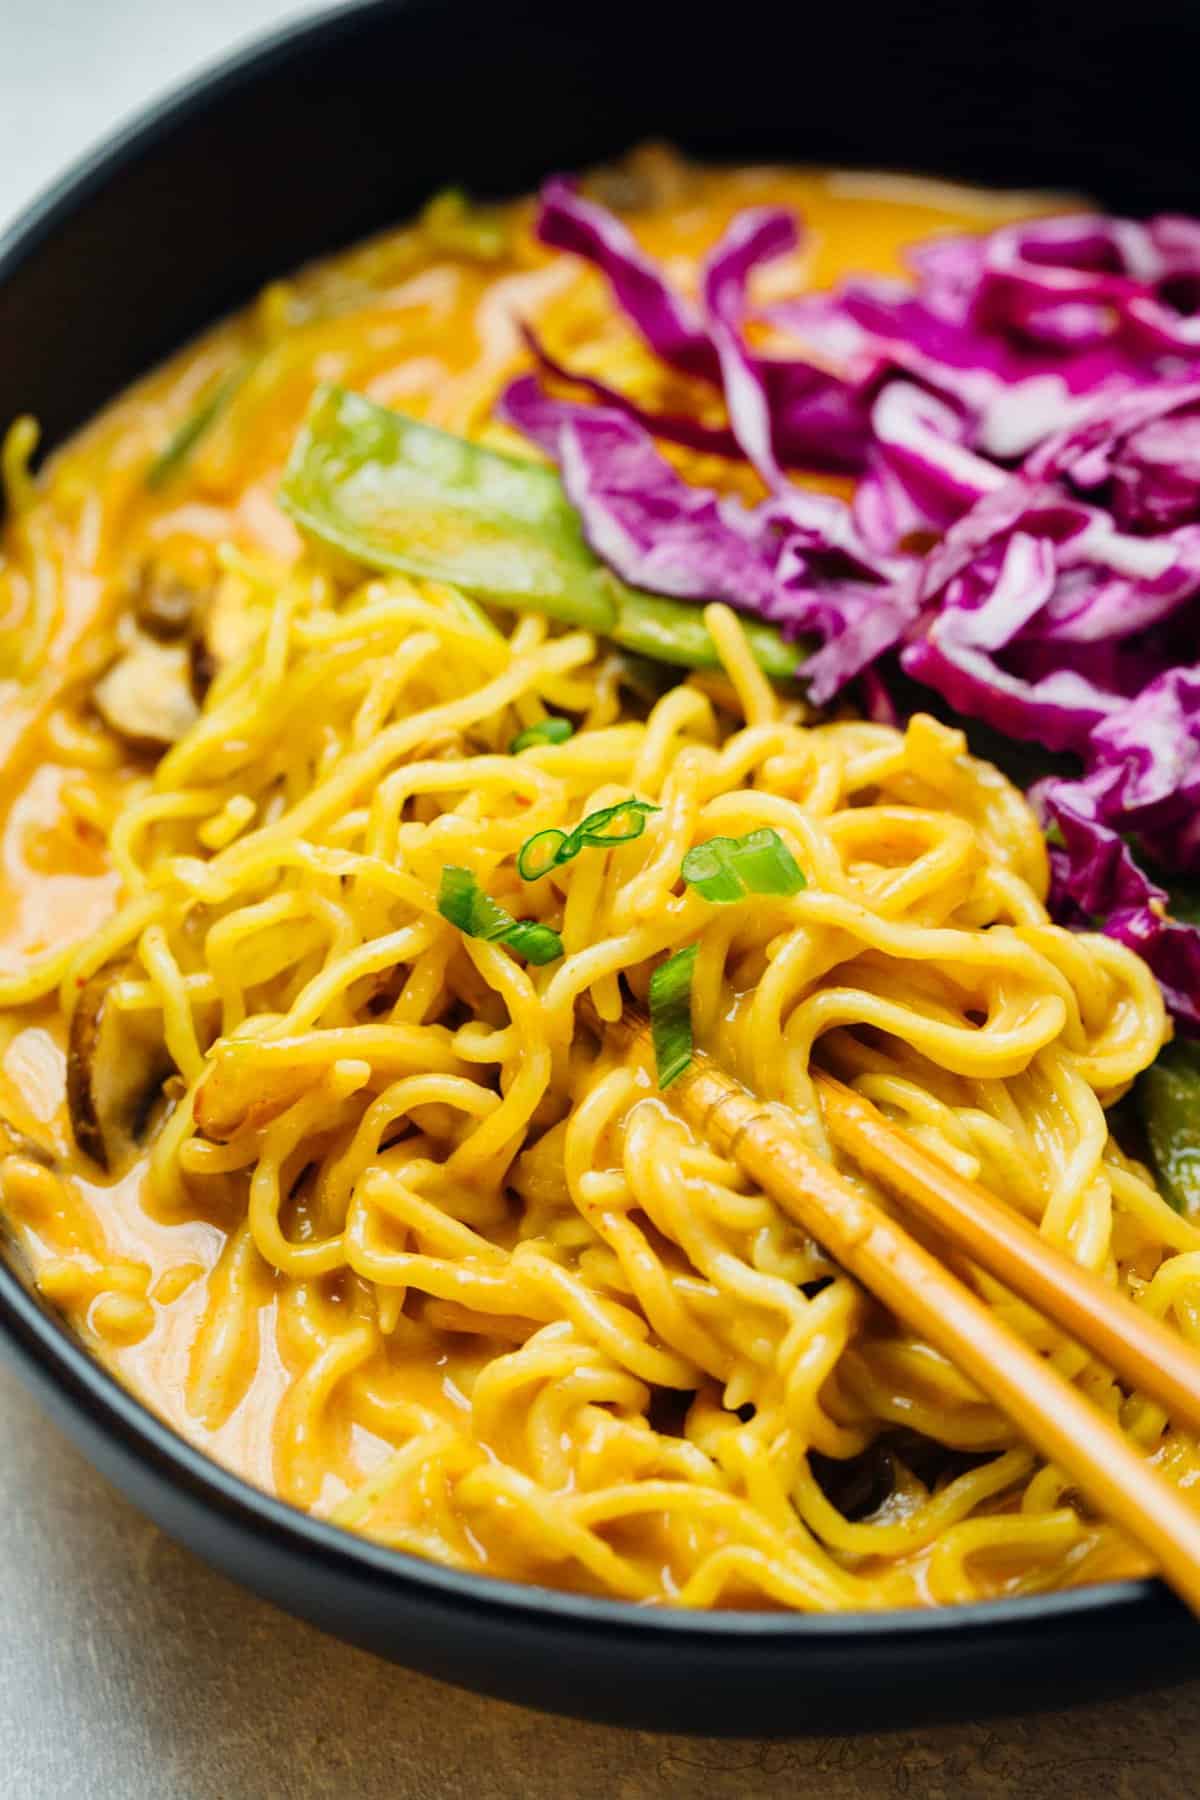 This coconut curry ramen will warm you right up! A delicious broth coats the tender ramen noodles. You will want to slurp up every last drop of this soup and ramen!